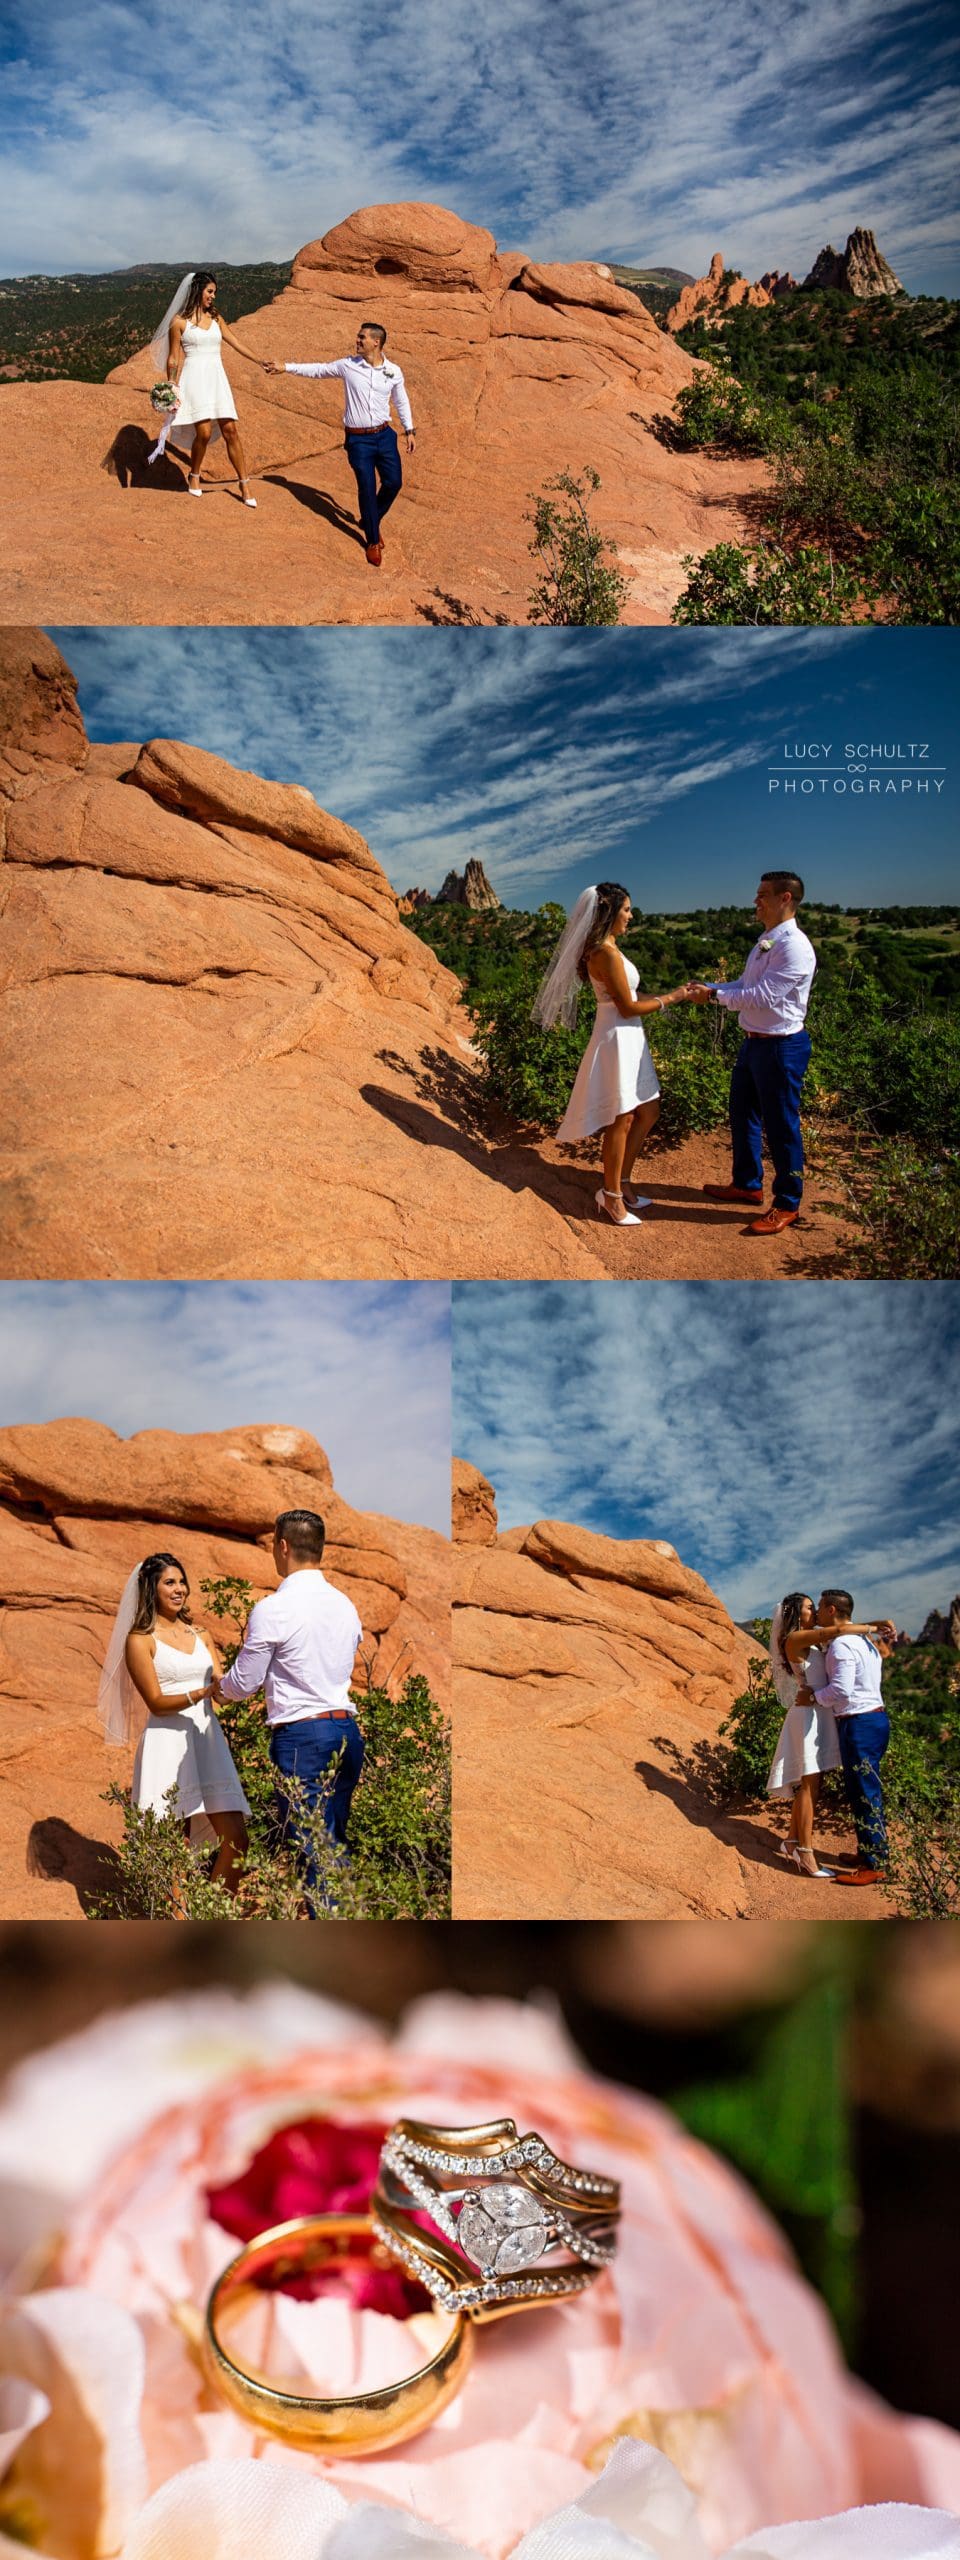 A latinx couple says their vows at garden of the gods park in Colorado Springs, Colorado at sunrise. The red rock spires are colorful against the blue sky and green trees.